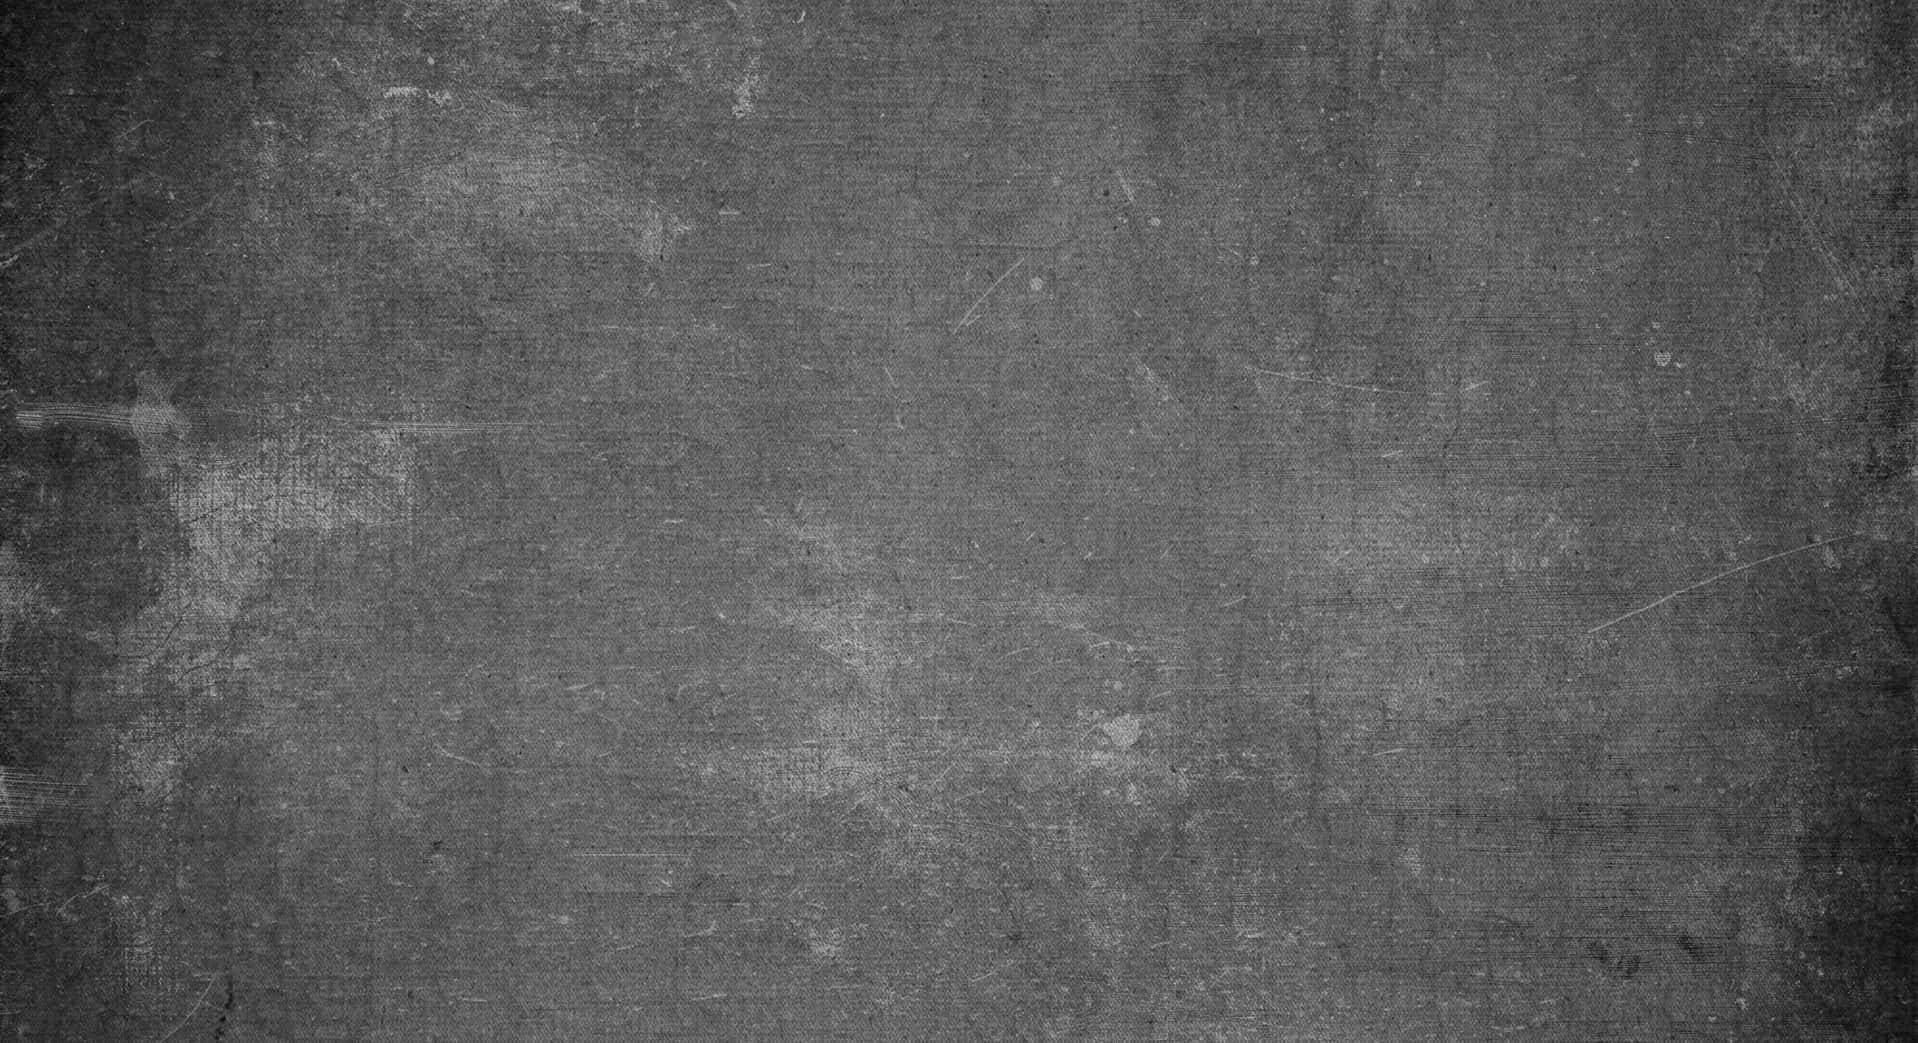 A Black And White Grunge Texture Background